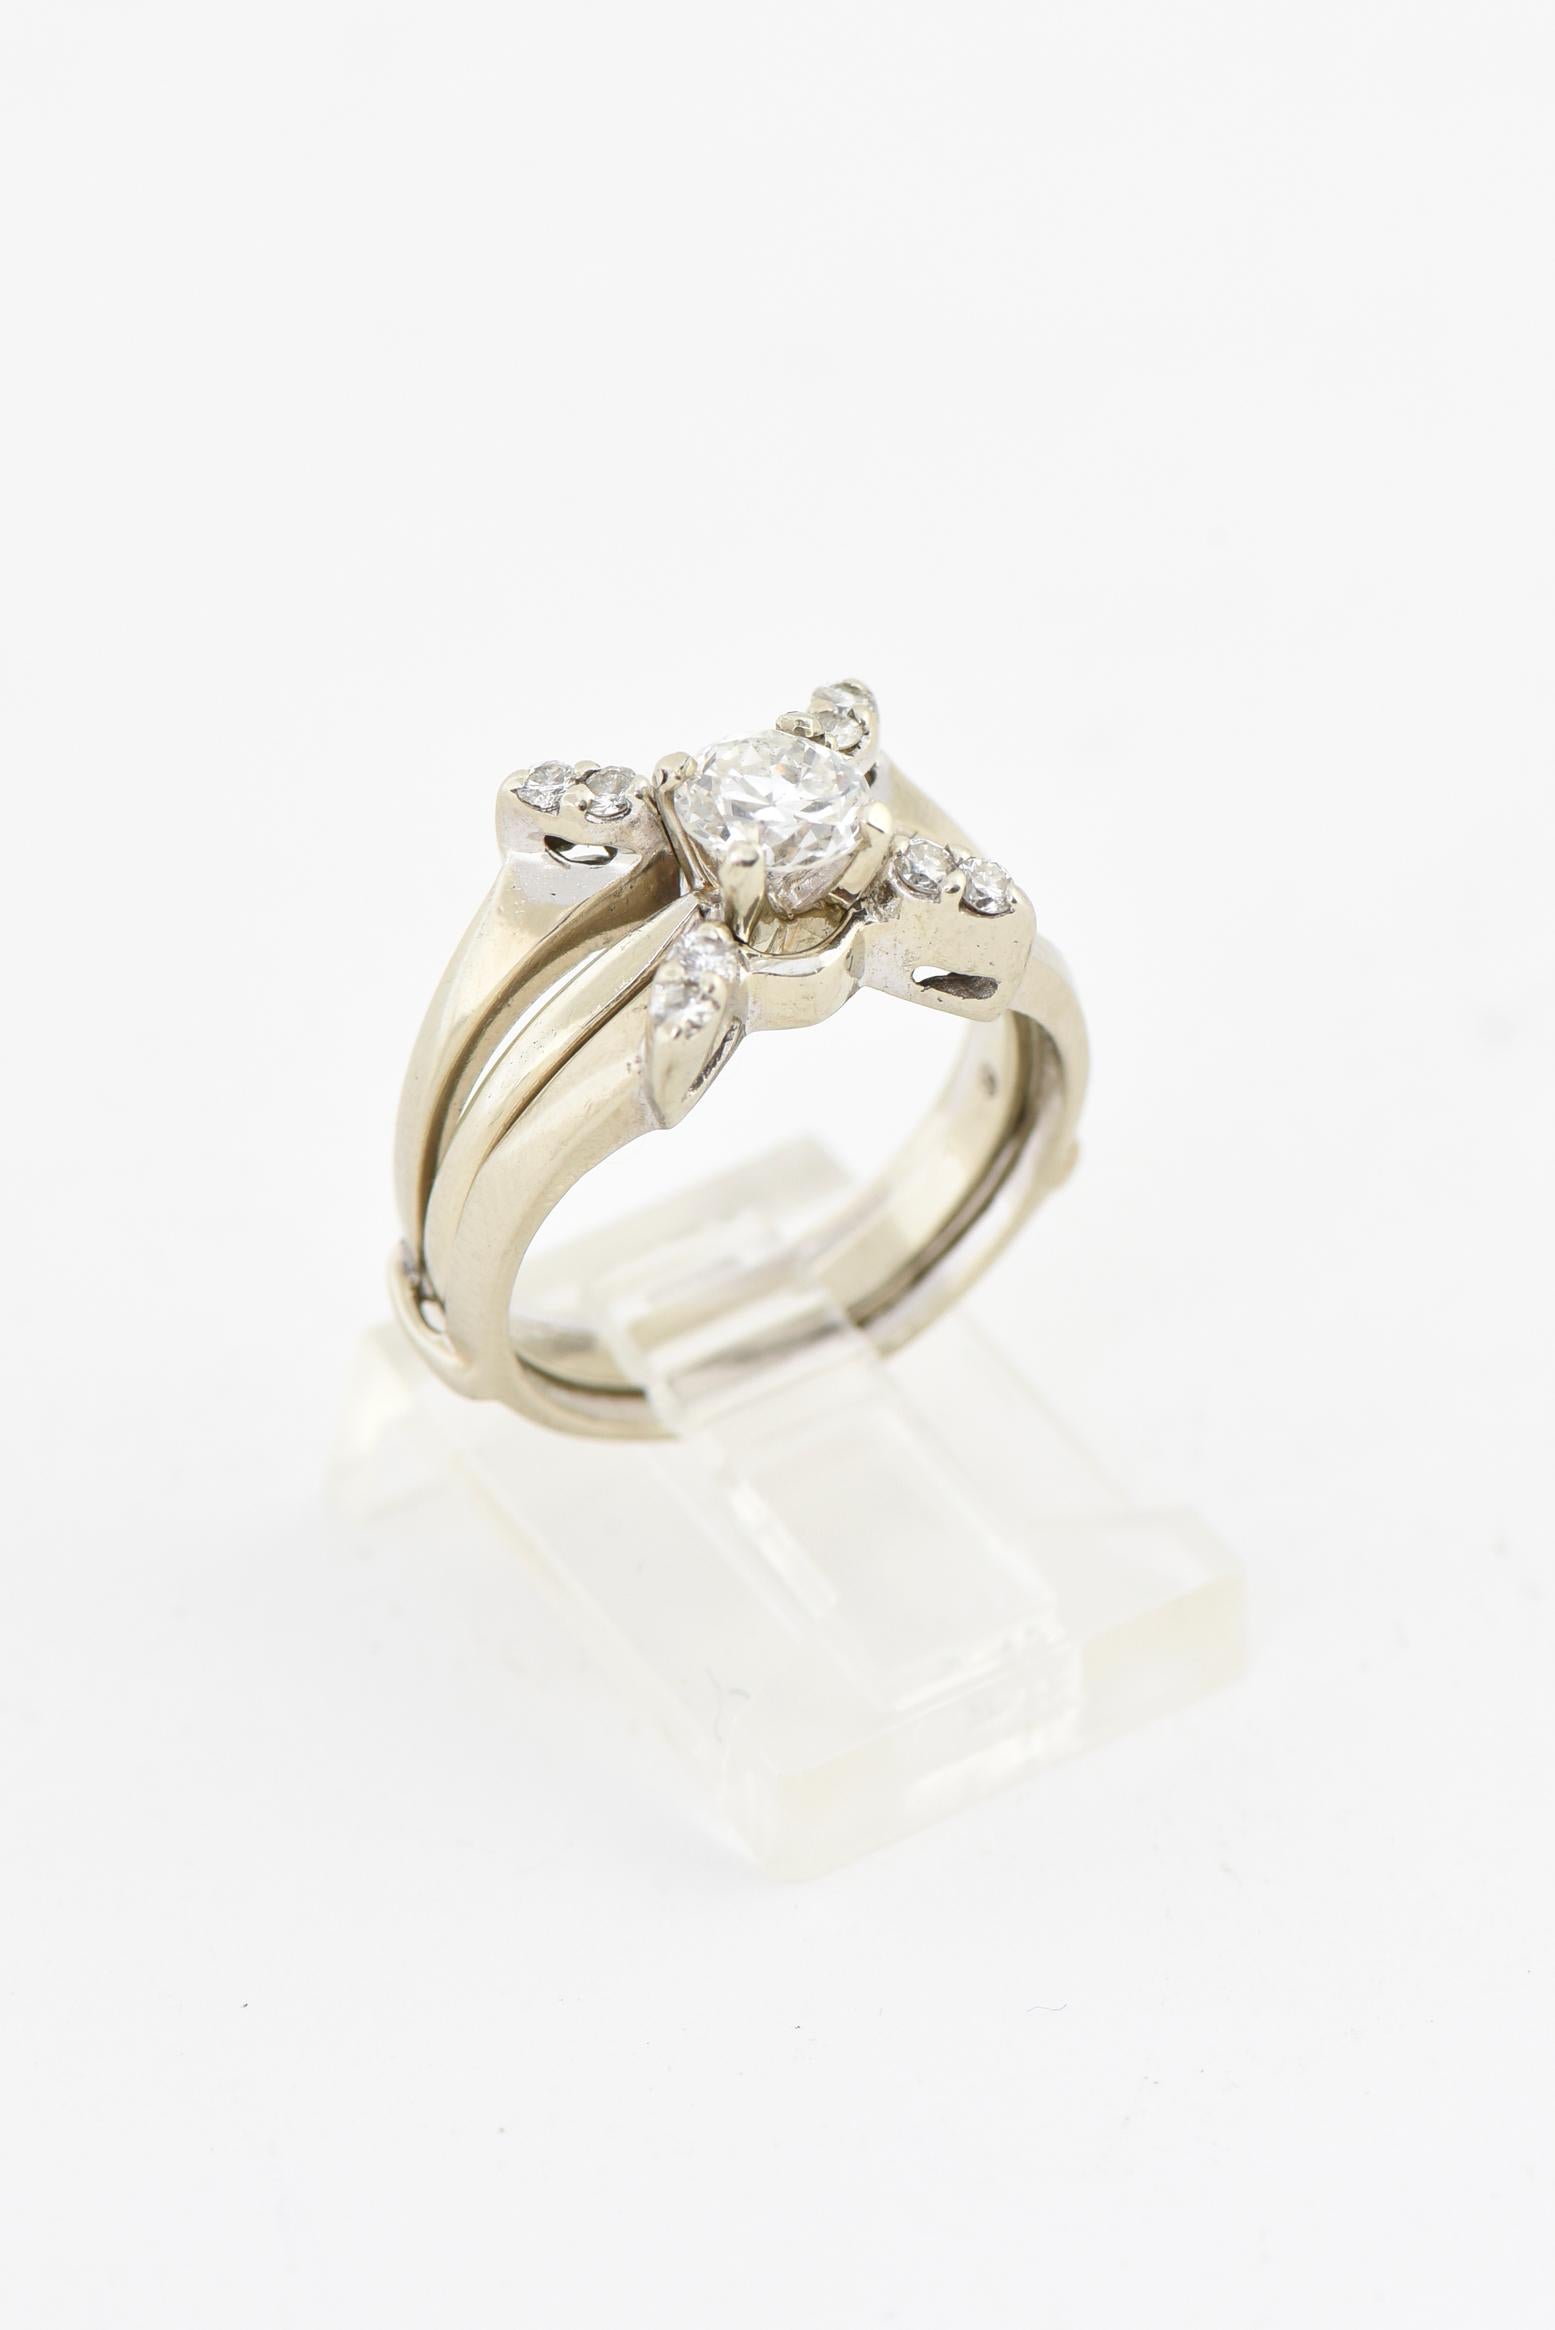 Diamond solitaire engagement ring featuring .62 carat (approximate weight) round diamond center inset in an attached matching 